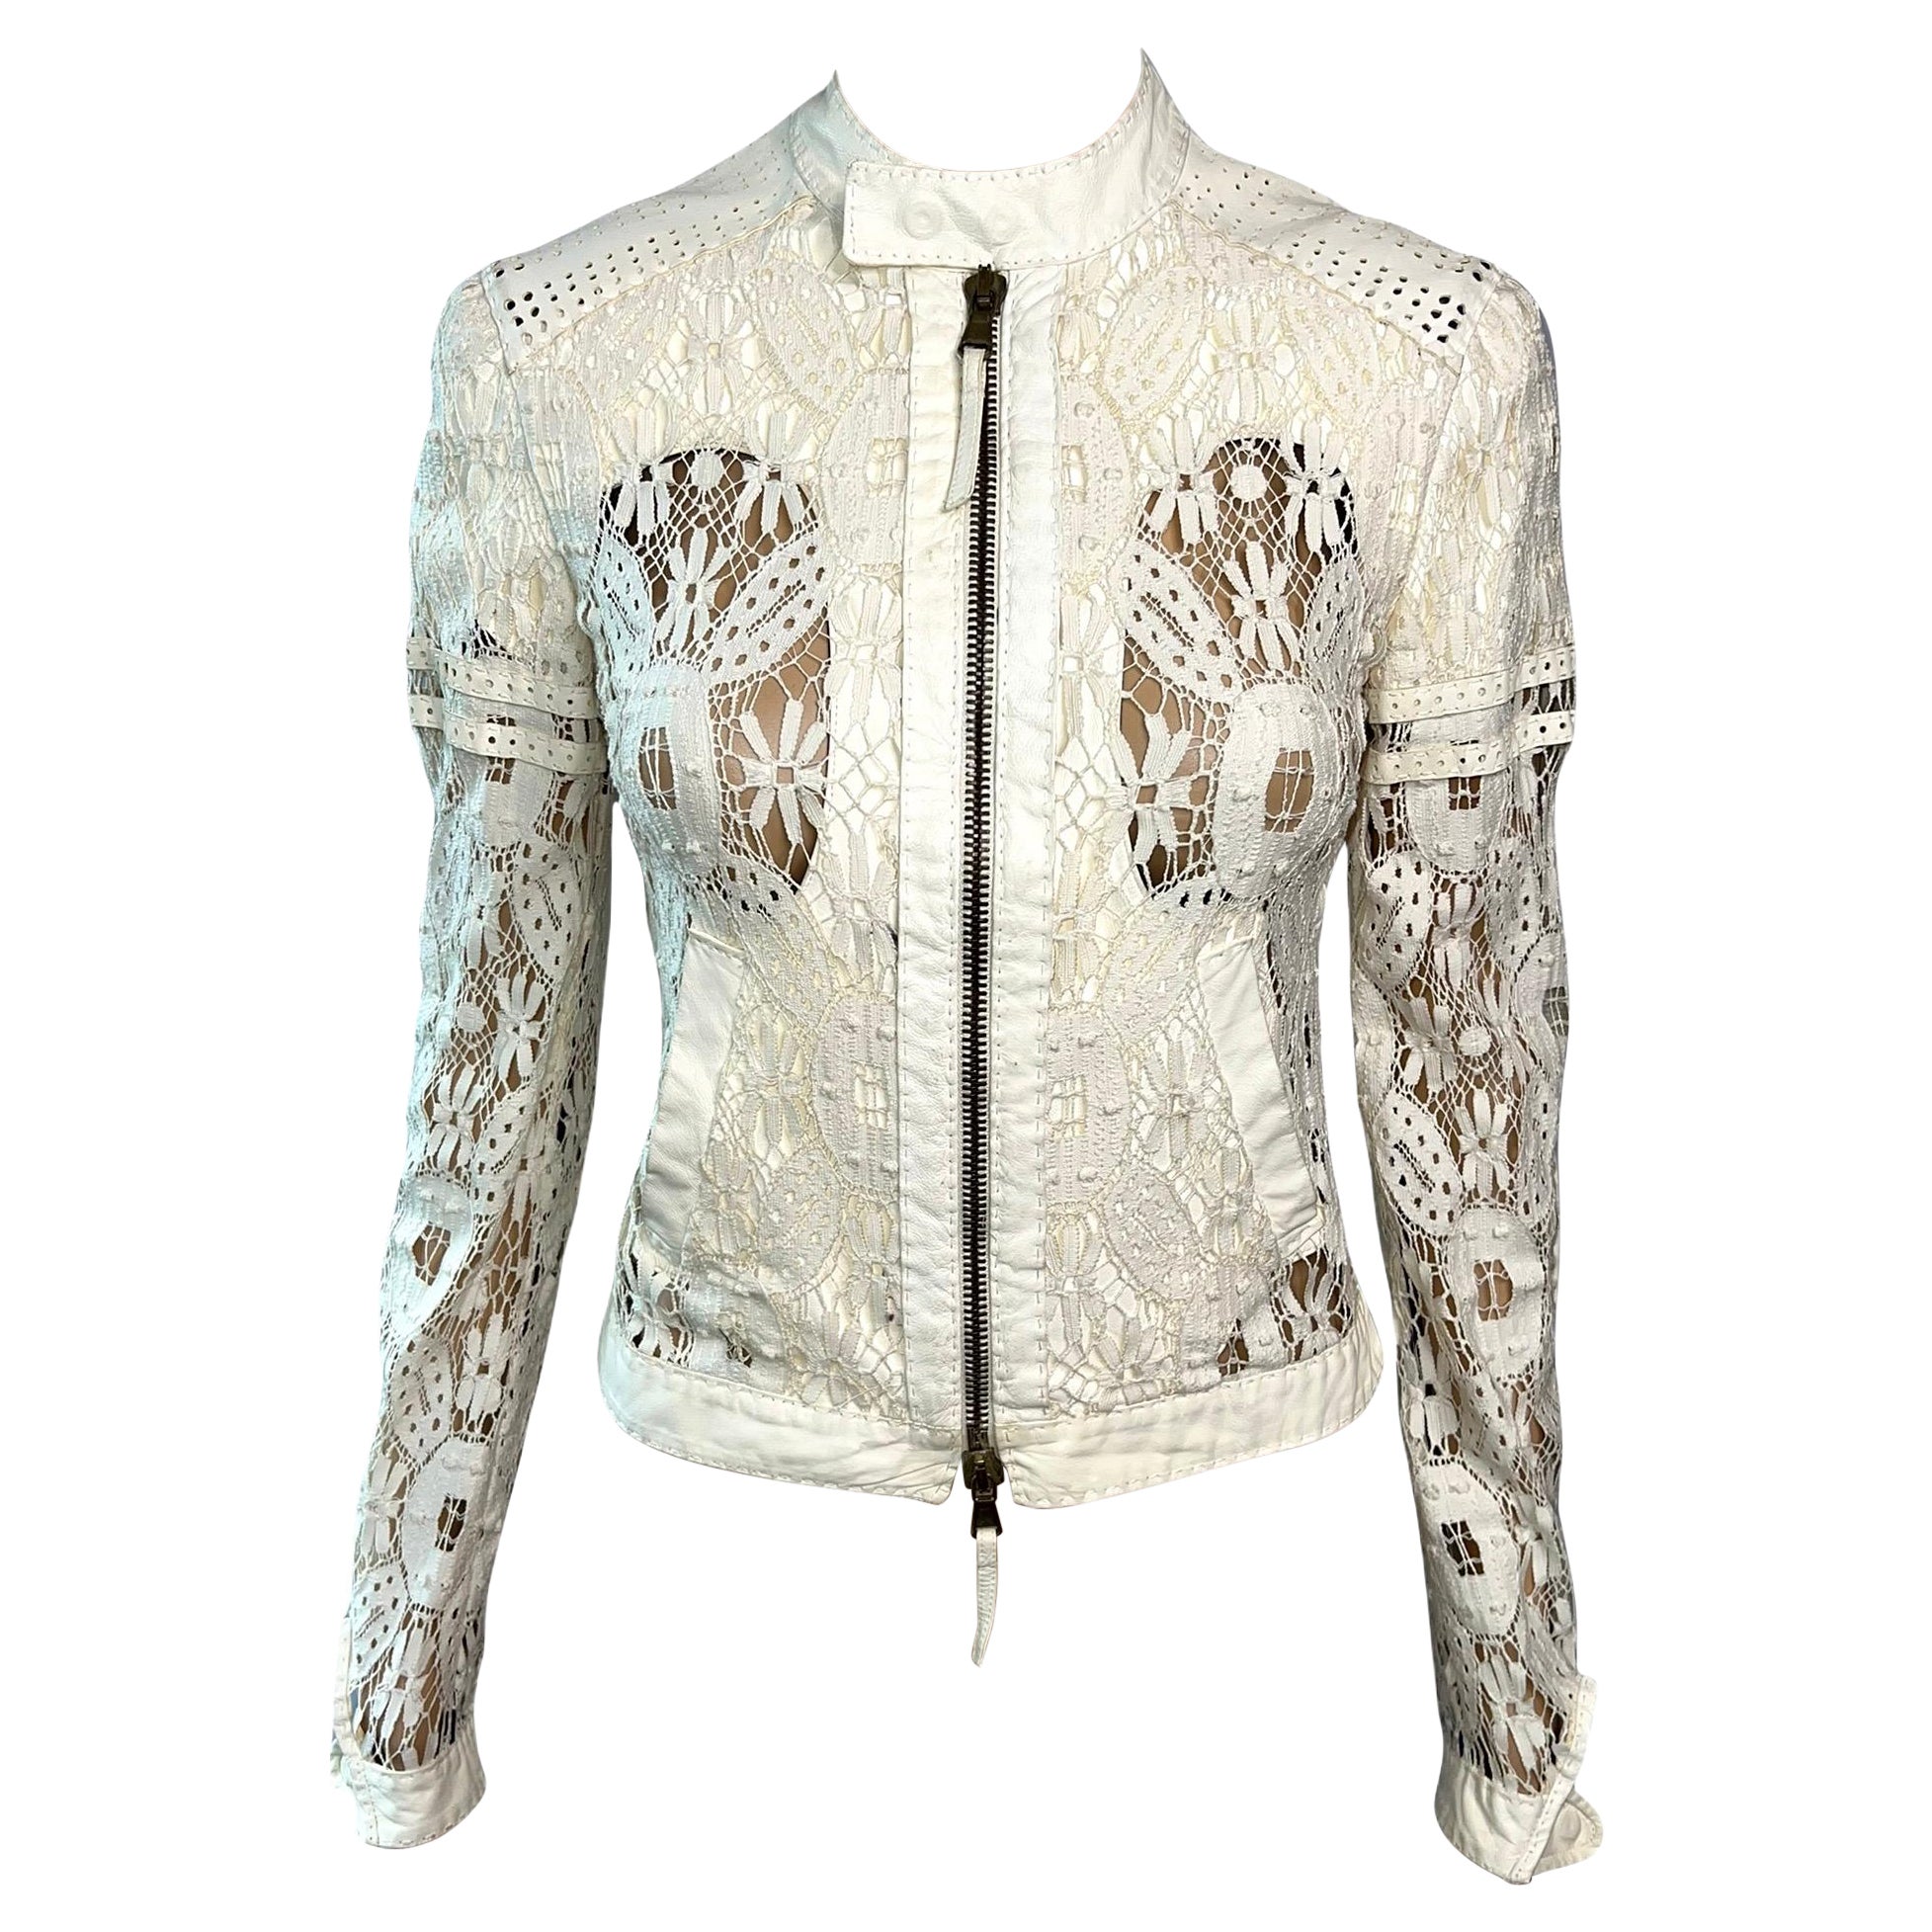 Jean Paul Gaultier Sheer Lace Inserts Cutout Ivory Top Jacket 